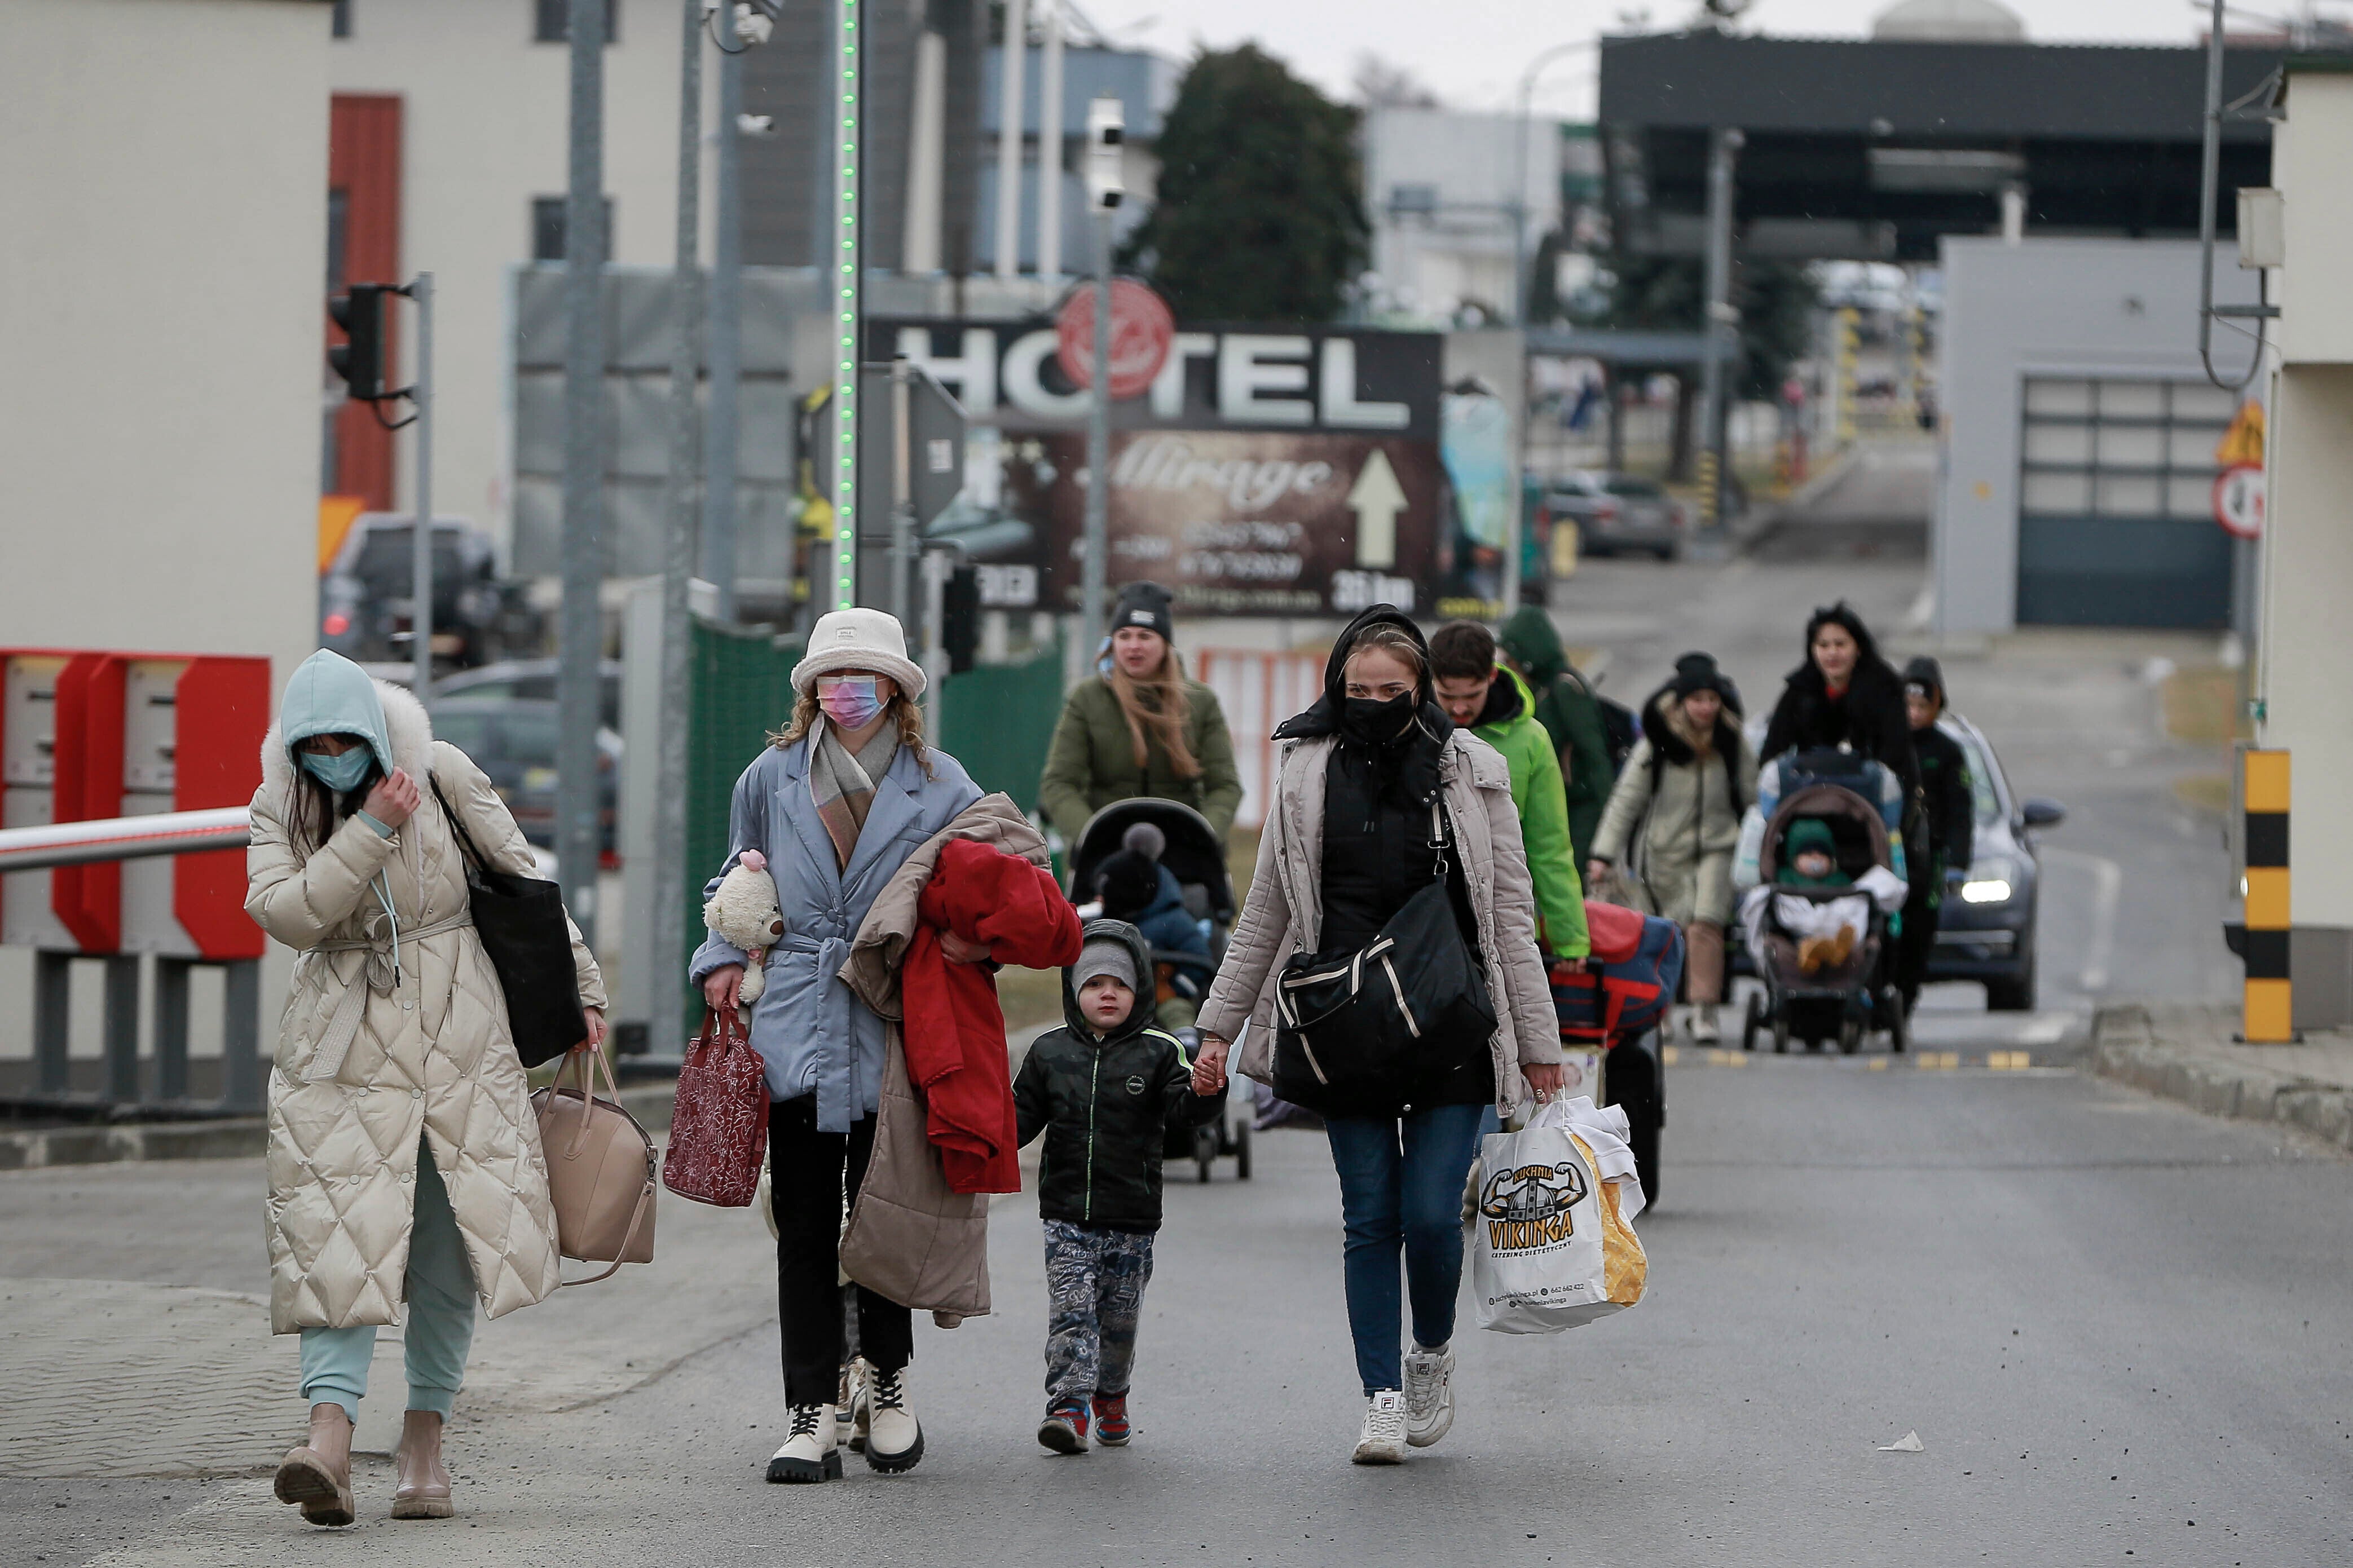 Refugees fleeing conflict in Ukraine arrive at the Medyka border crossing, in Poland, Feb. 27, 2022